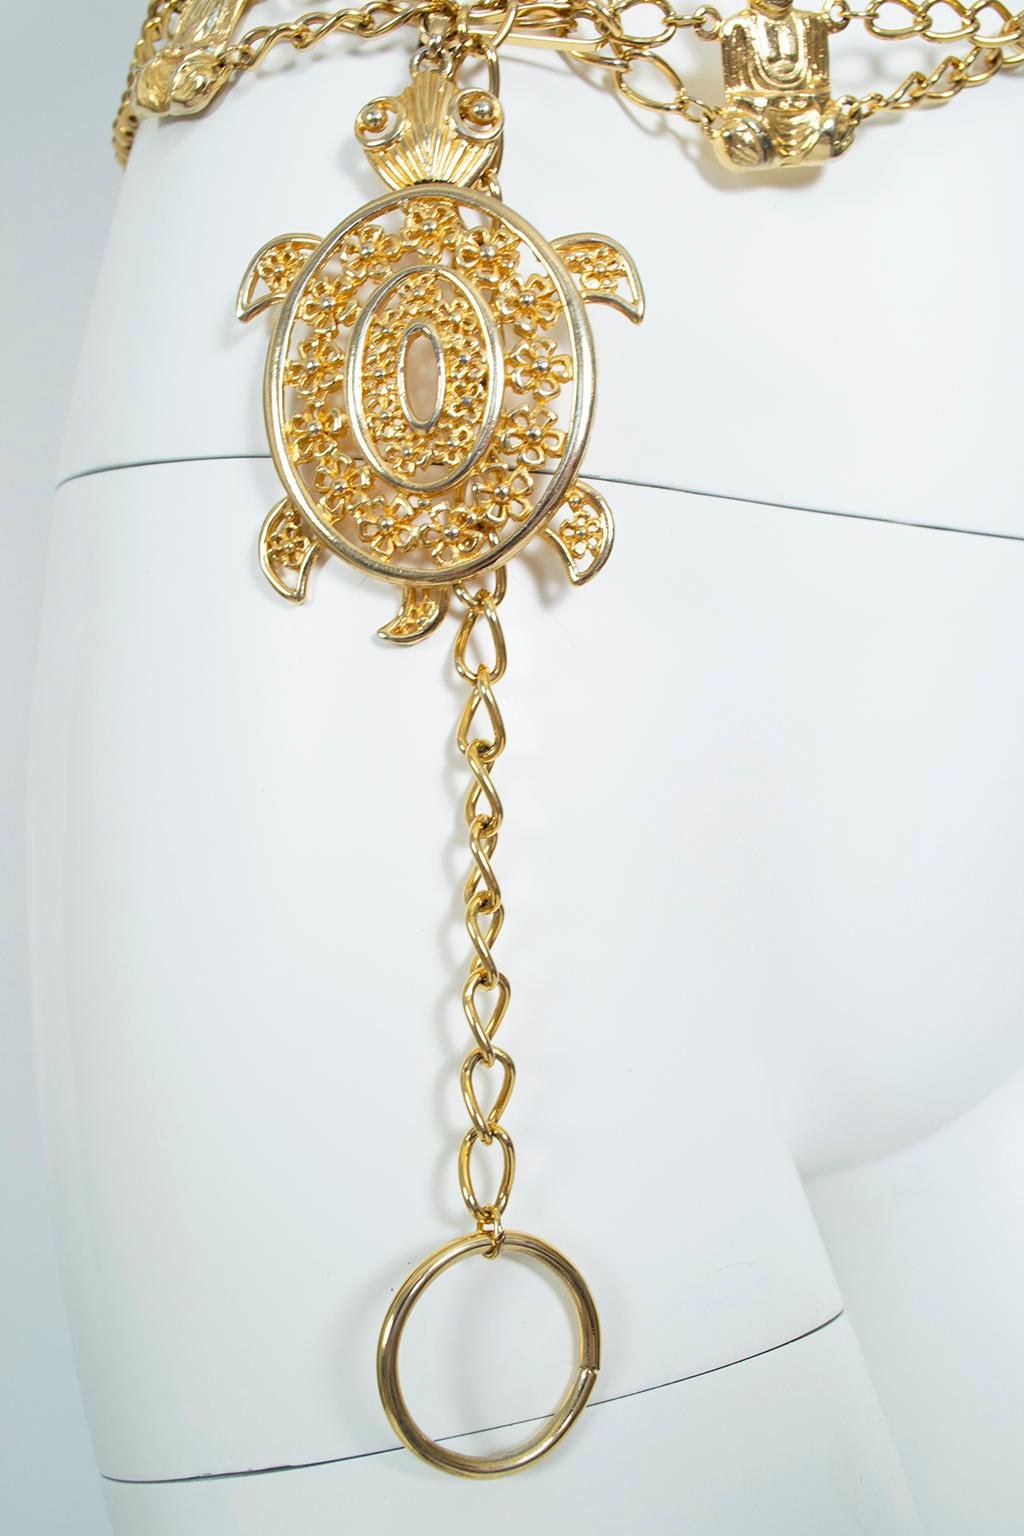 Women's or Men's “Golden Turtle” Buddhist Chain Belt with Dangling Turtle Talisman – O/S, 1980s